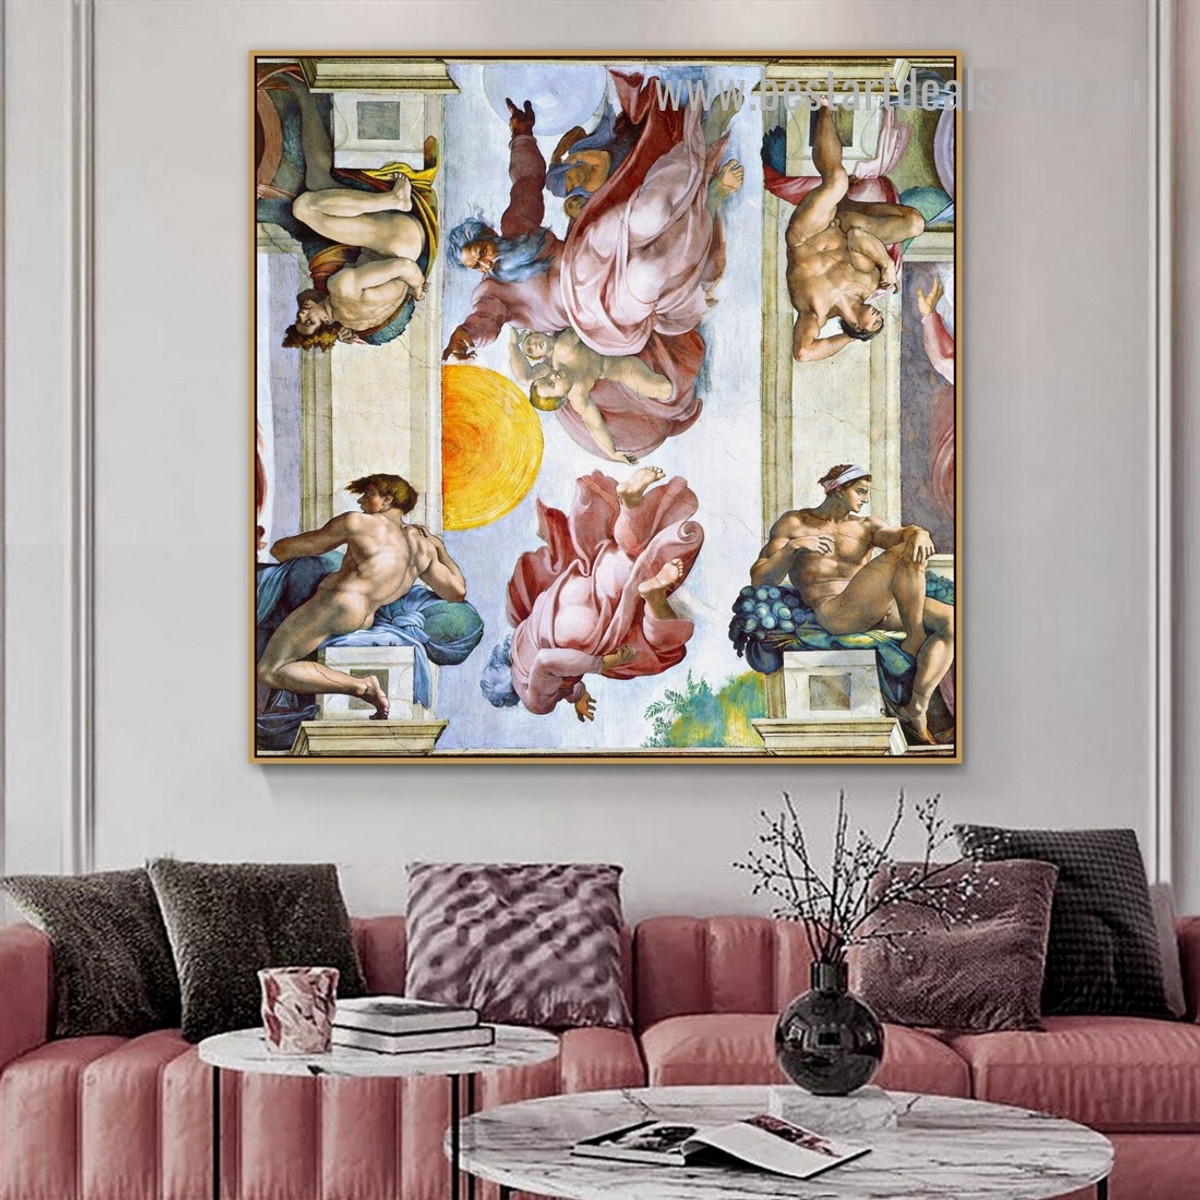 Sistine Chapel Ceiling Creation of the Sun and Moon Michelangelo High Renaissance Figure Reproduction Artwork Picture Canvas Print for Room Wall Decor